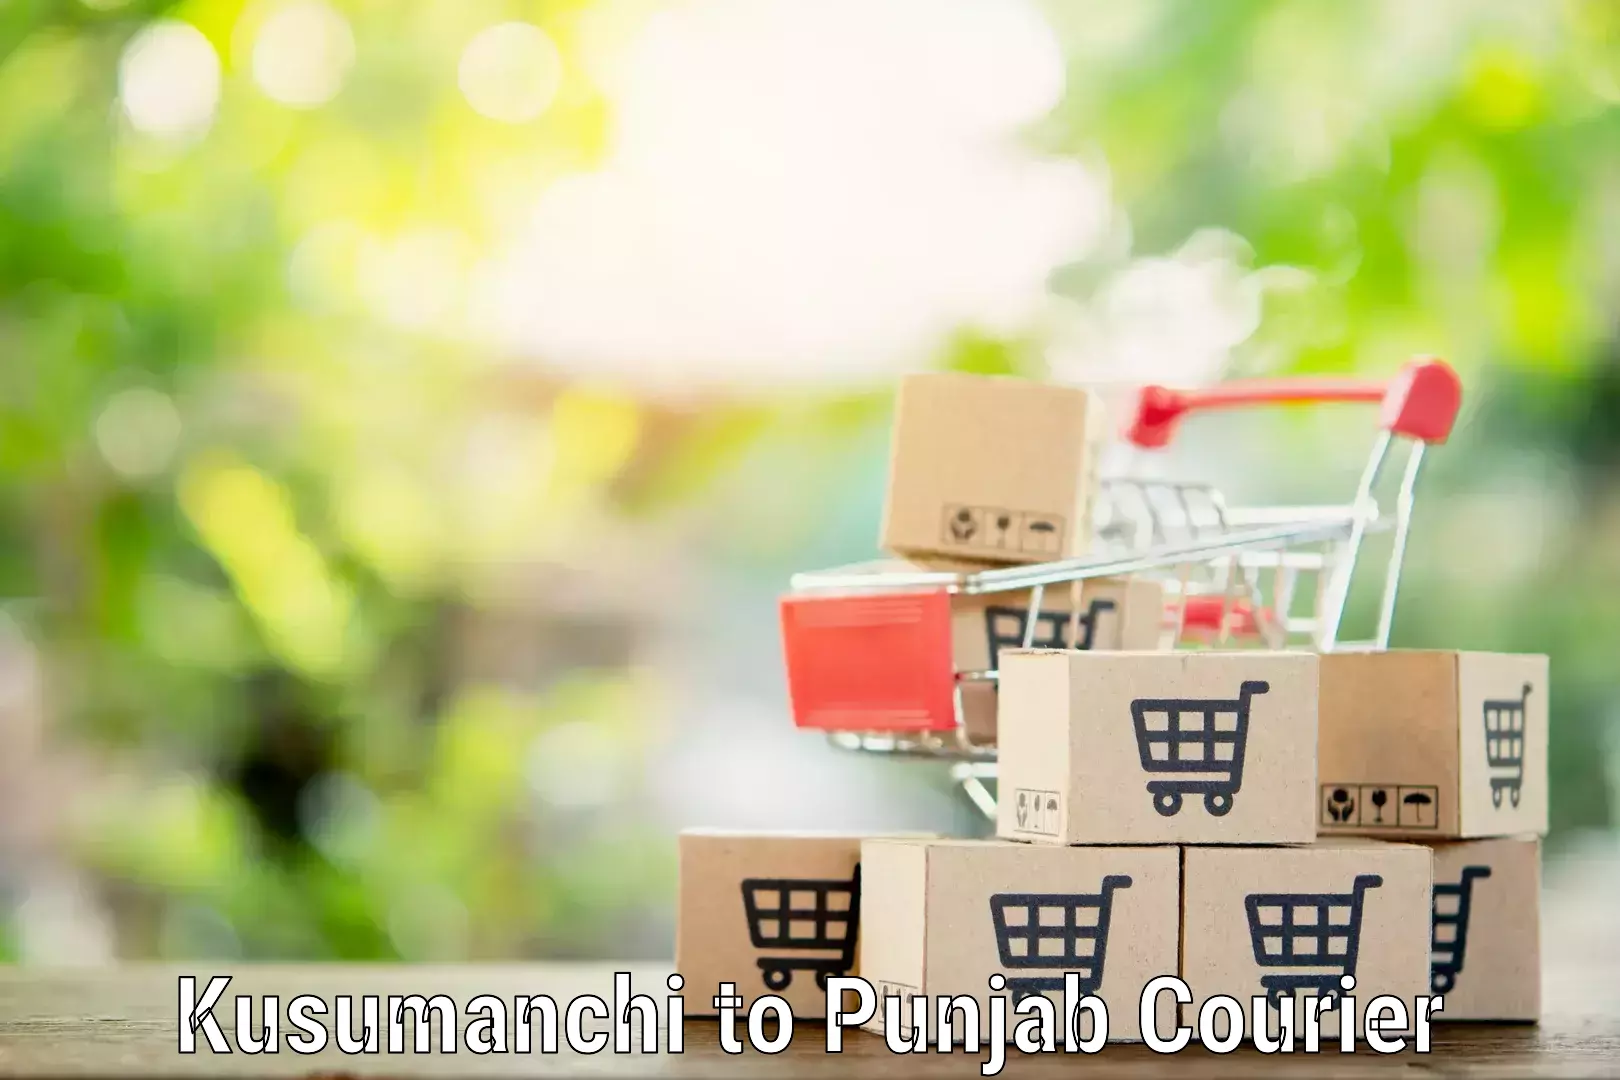 Efficient home movers Kusumanchi to Patiala